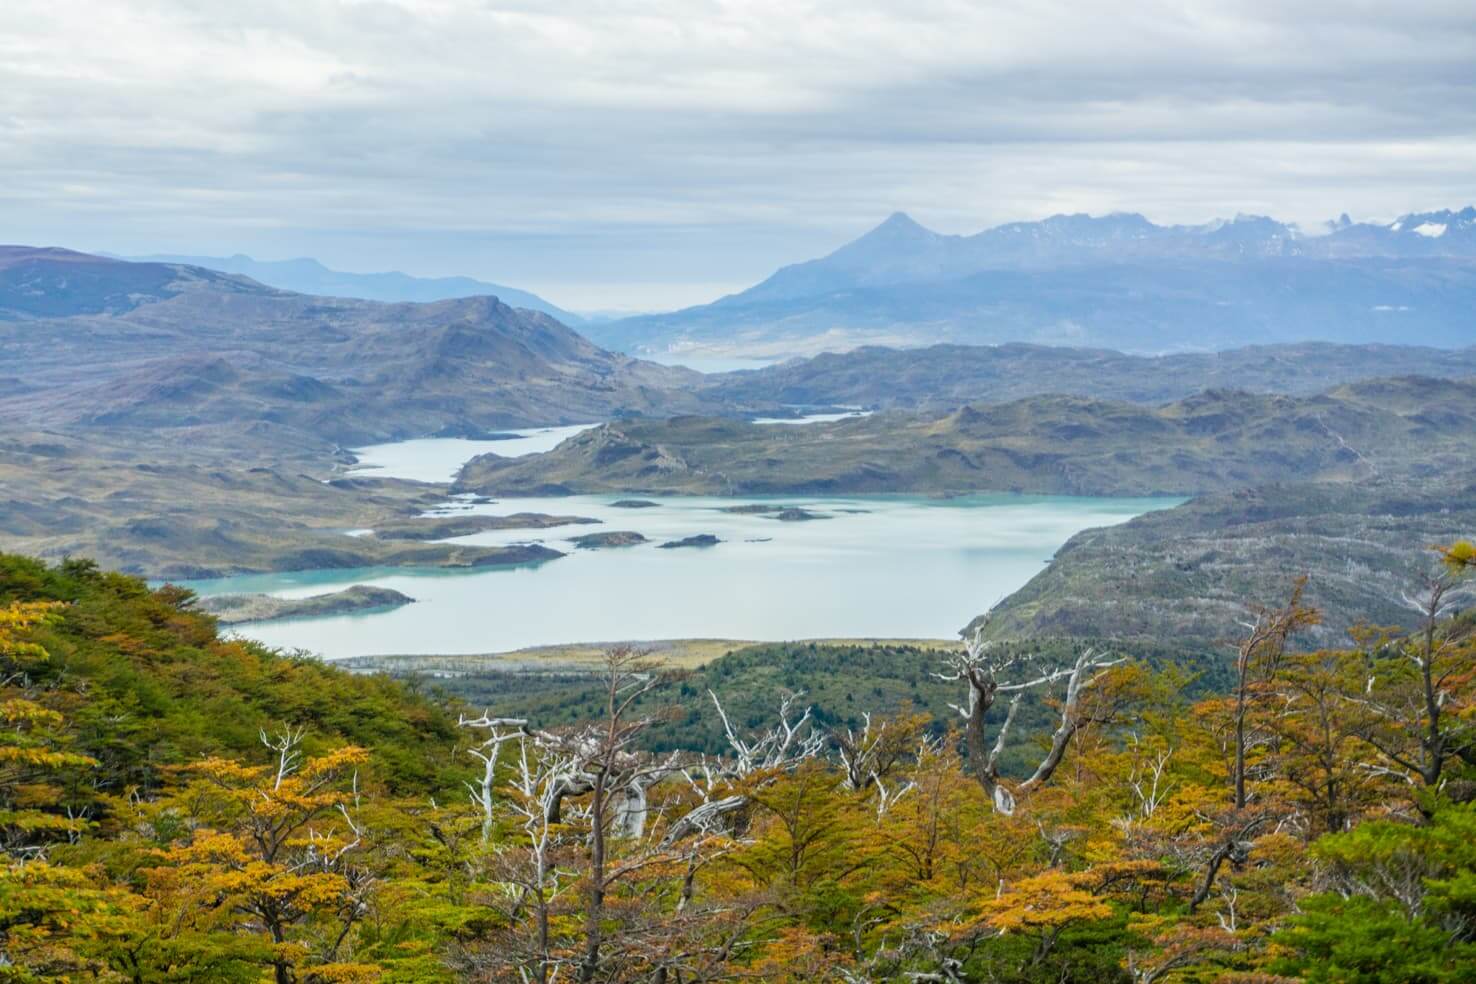 How to get beaver fever in Torres del Paine national park, Chile